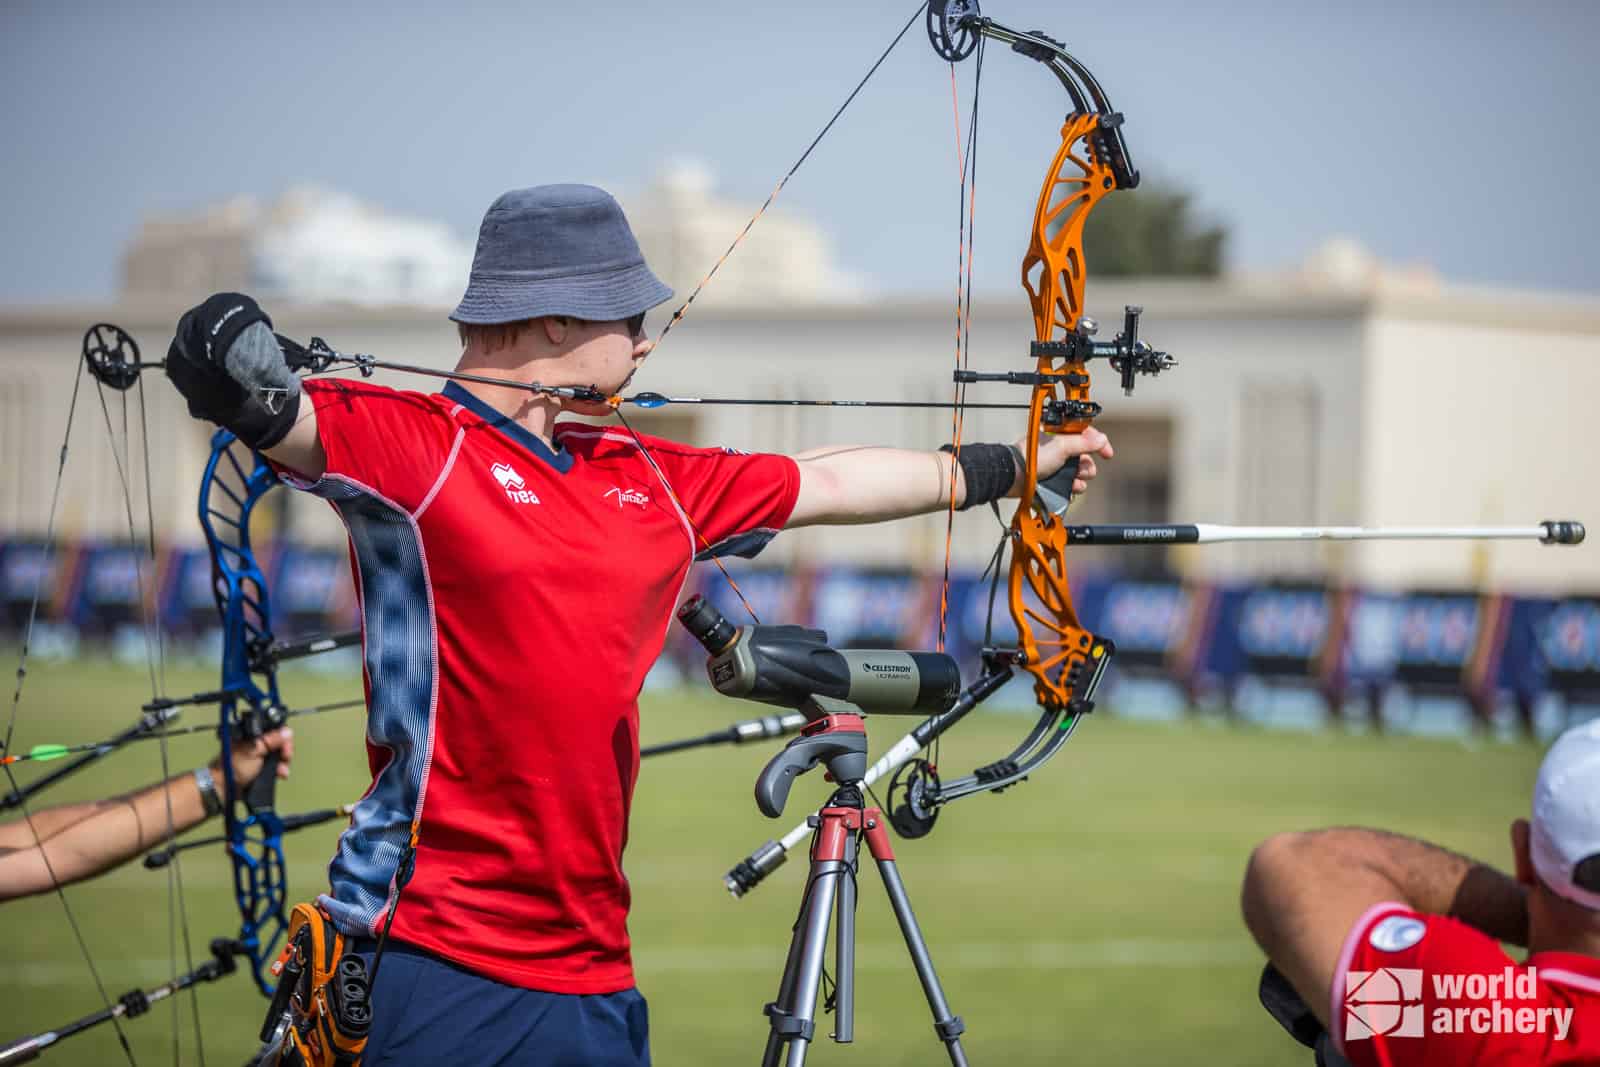 Compound Open Qualification at World Archery Para Championships 2022